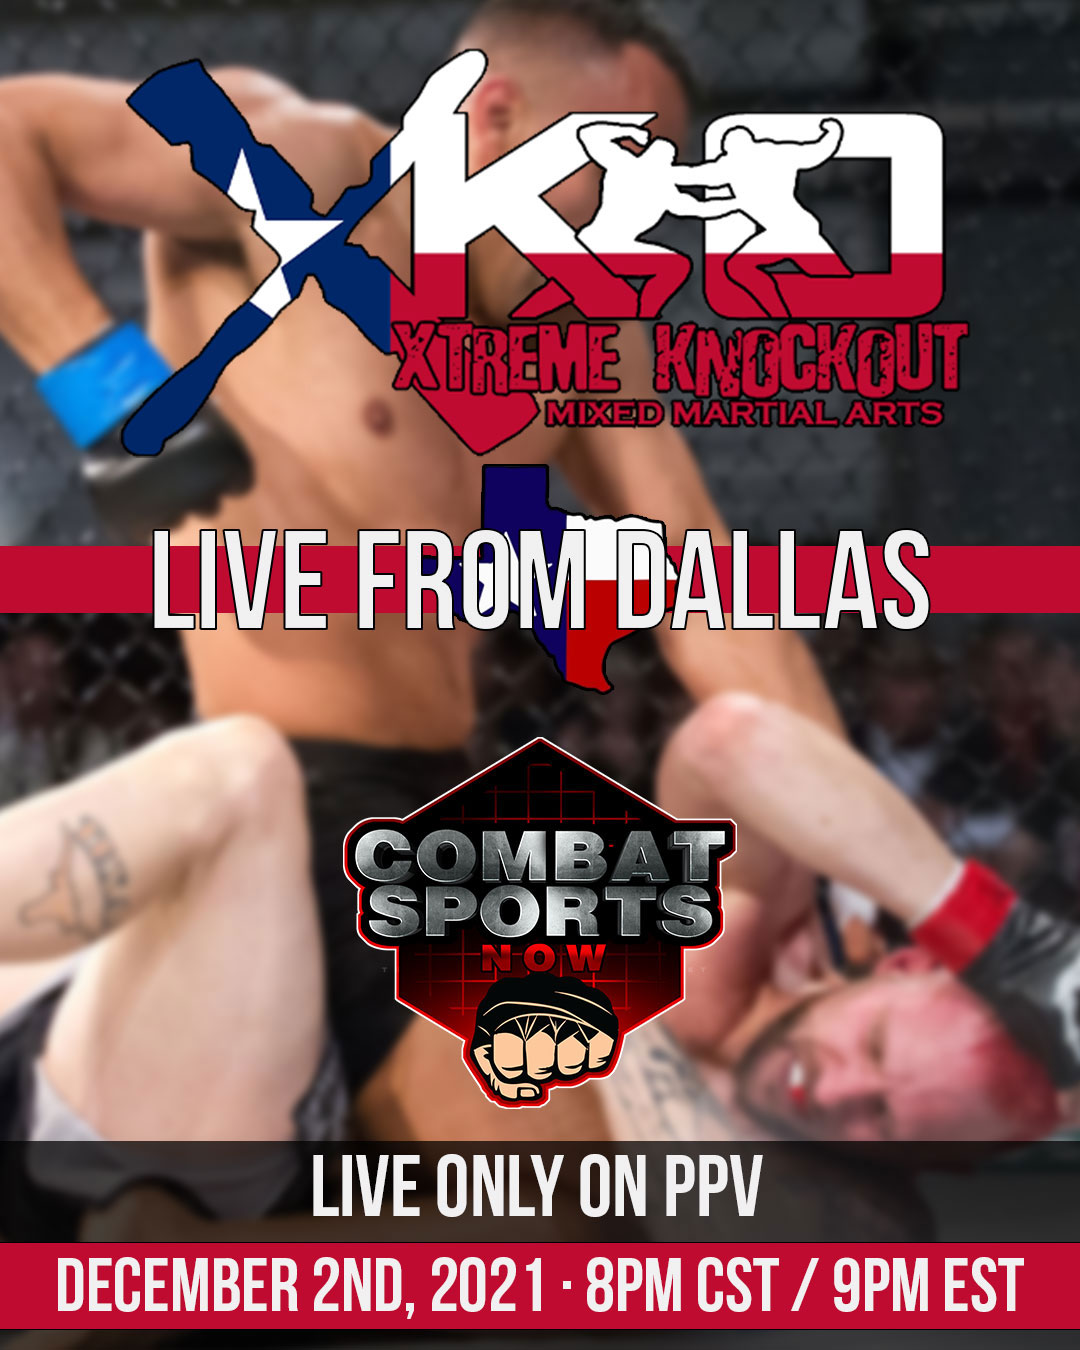 Watch XKO Live from Dallas on Combat Sports Now